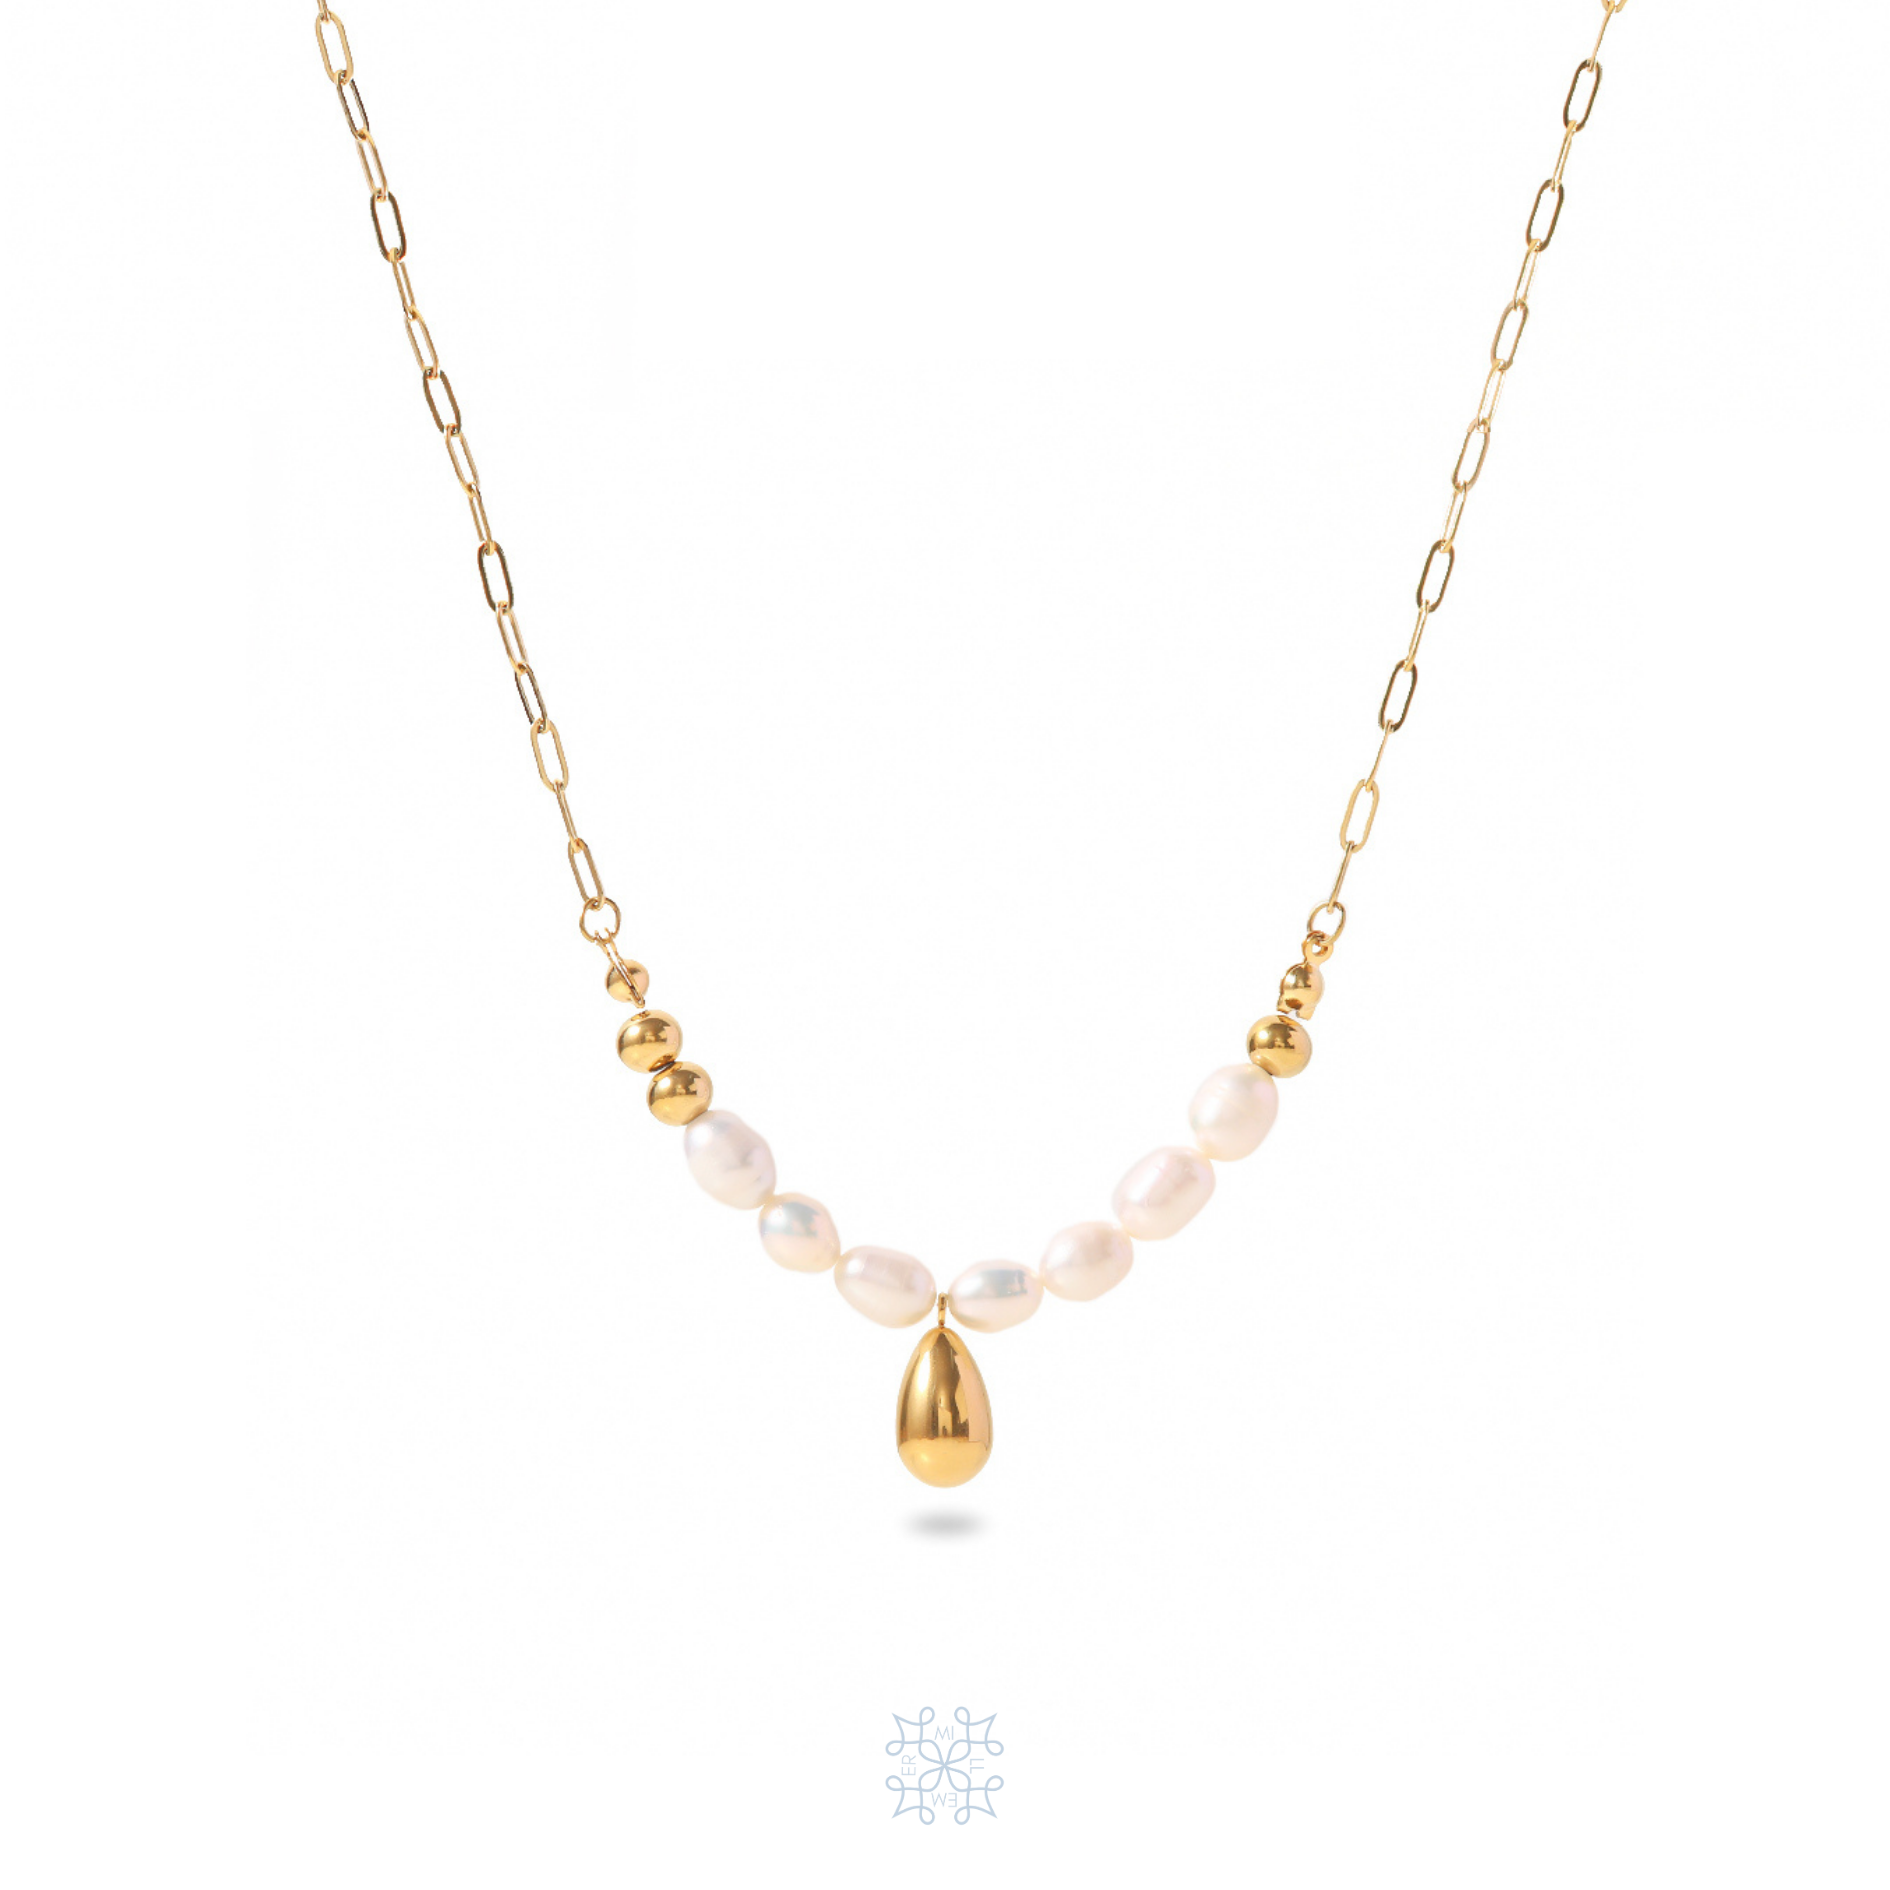 RAIN Pearls Gold Drop Necklace - Gold plated necklace.Fold Chain and White pearl and a gold plated waterdrop shape pendant in the middle of the pearls. 